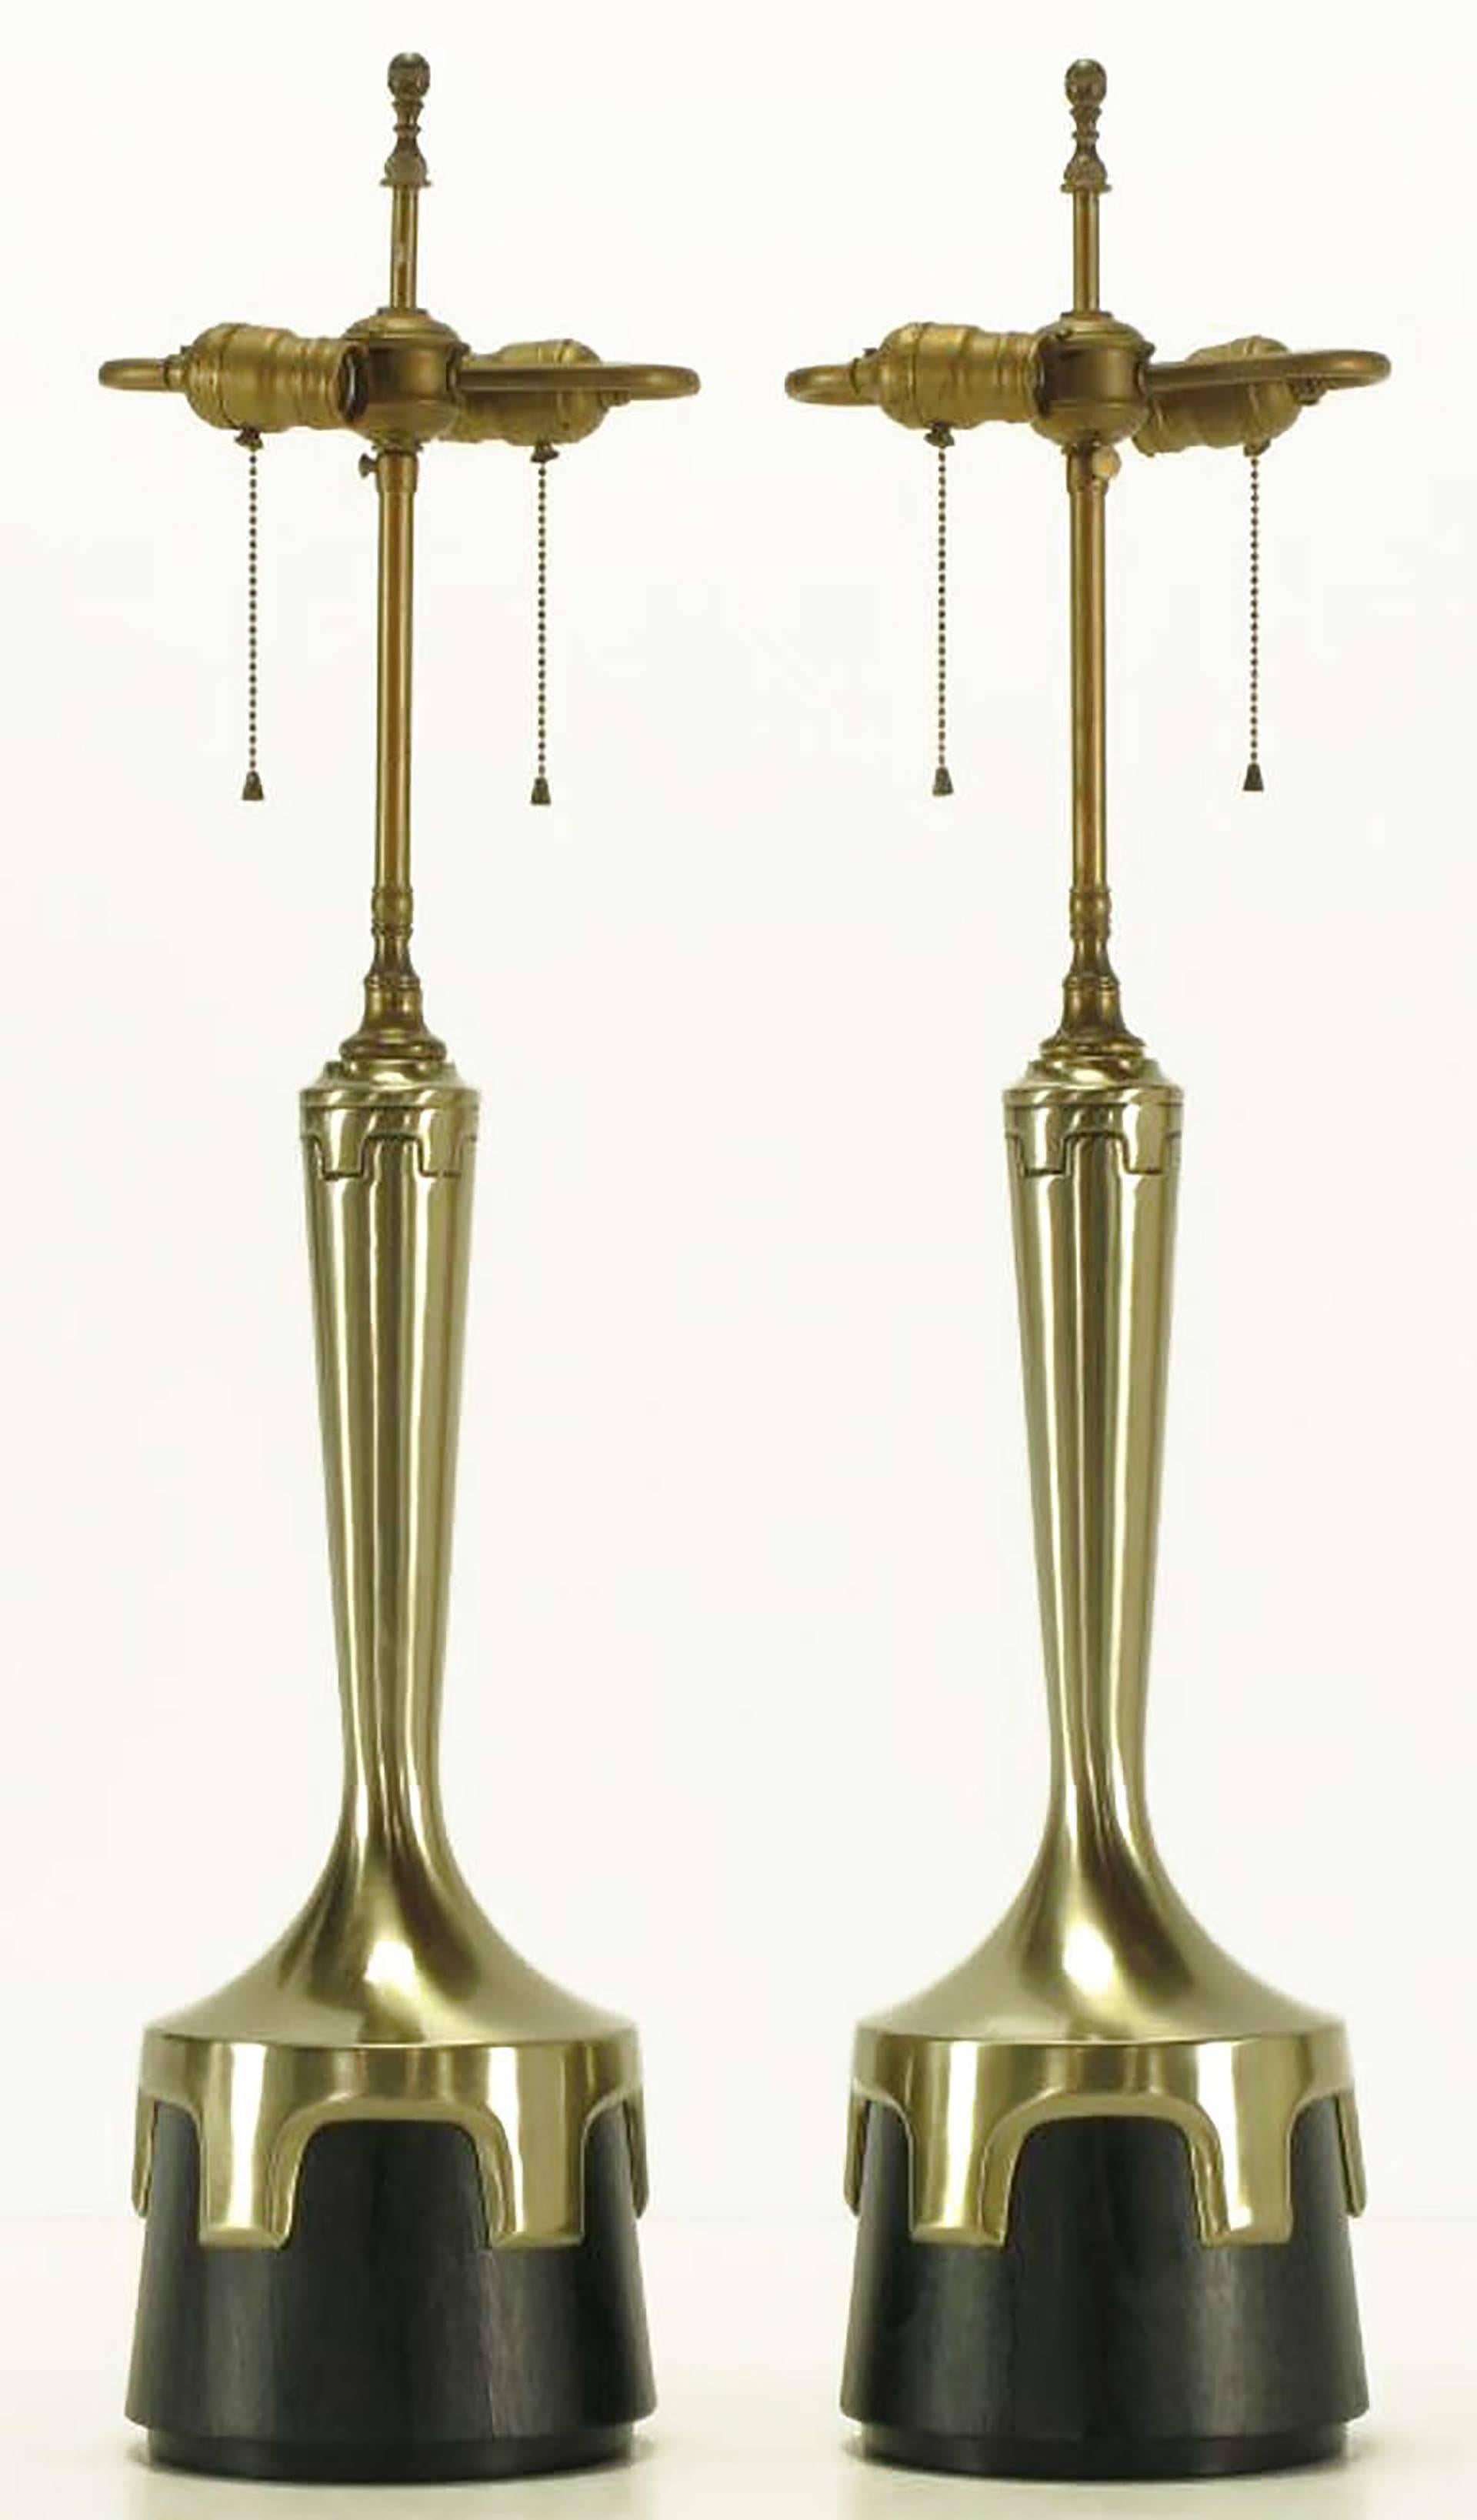 Pair of early Frederick Cooper aged nickel (not brass) and ebonized walnut table lamps. Nickel-plated bodies with inverted crenellations clasping ebonized veneer bases. Incised decoration encircling the necks echoes the crenellated design. Double